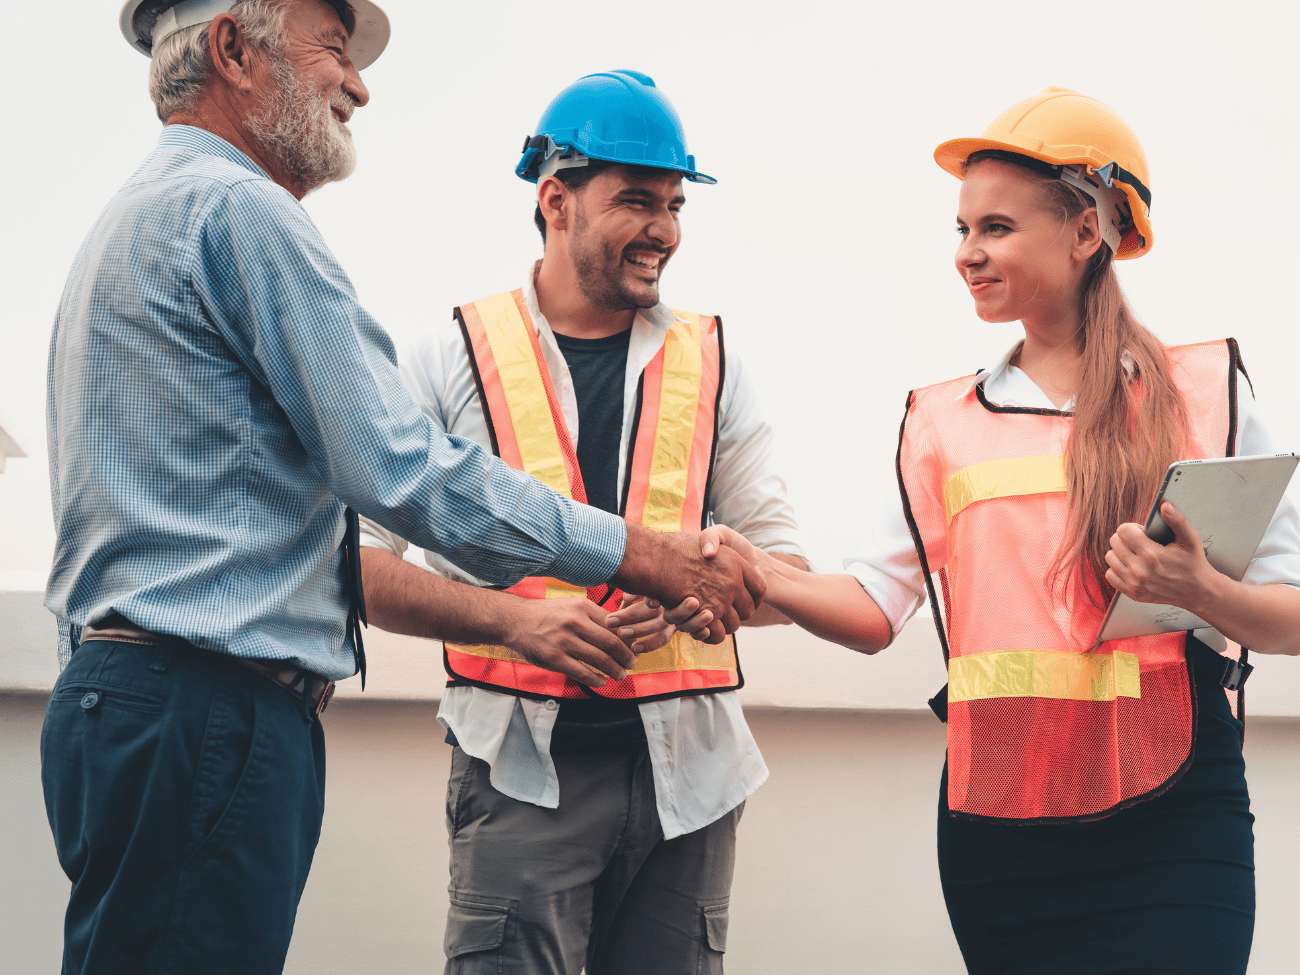 Woman With Tablet Shaking Hands With Man In Hard Hat